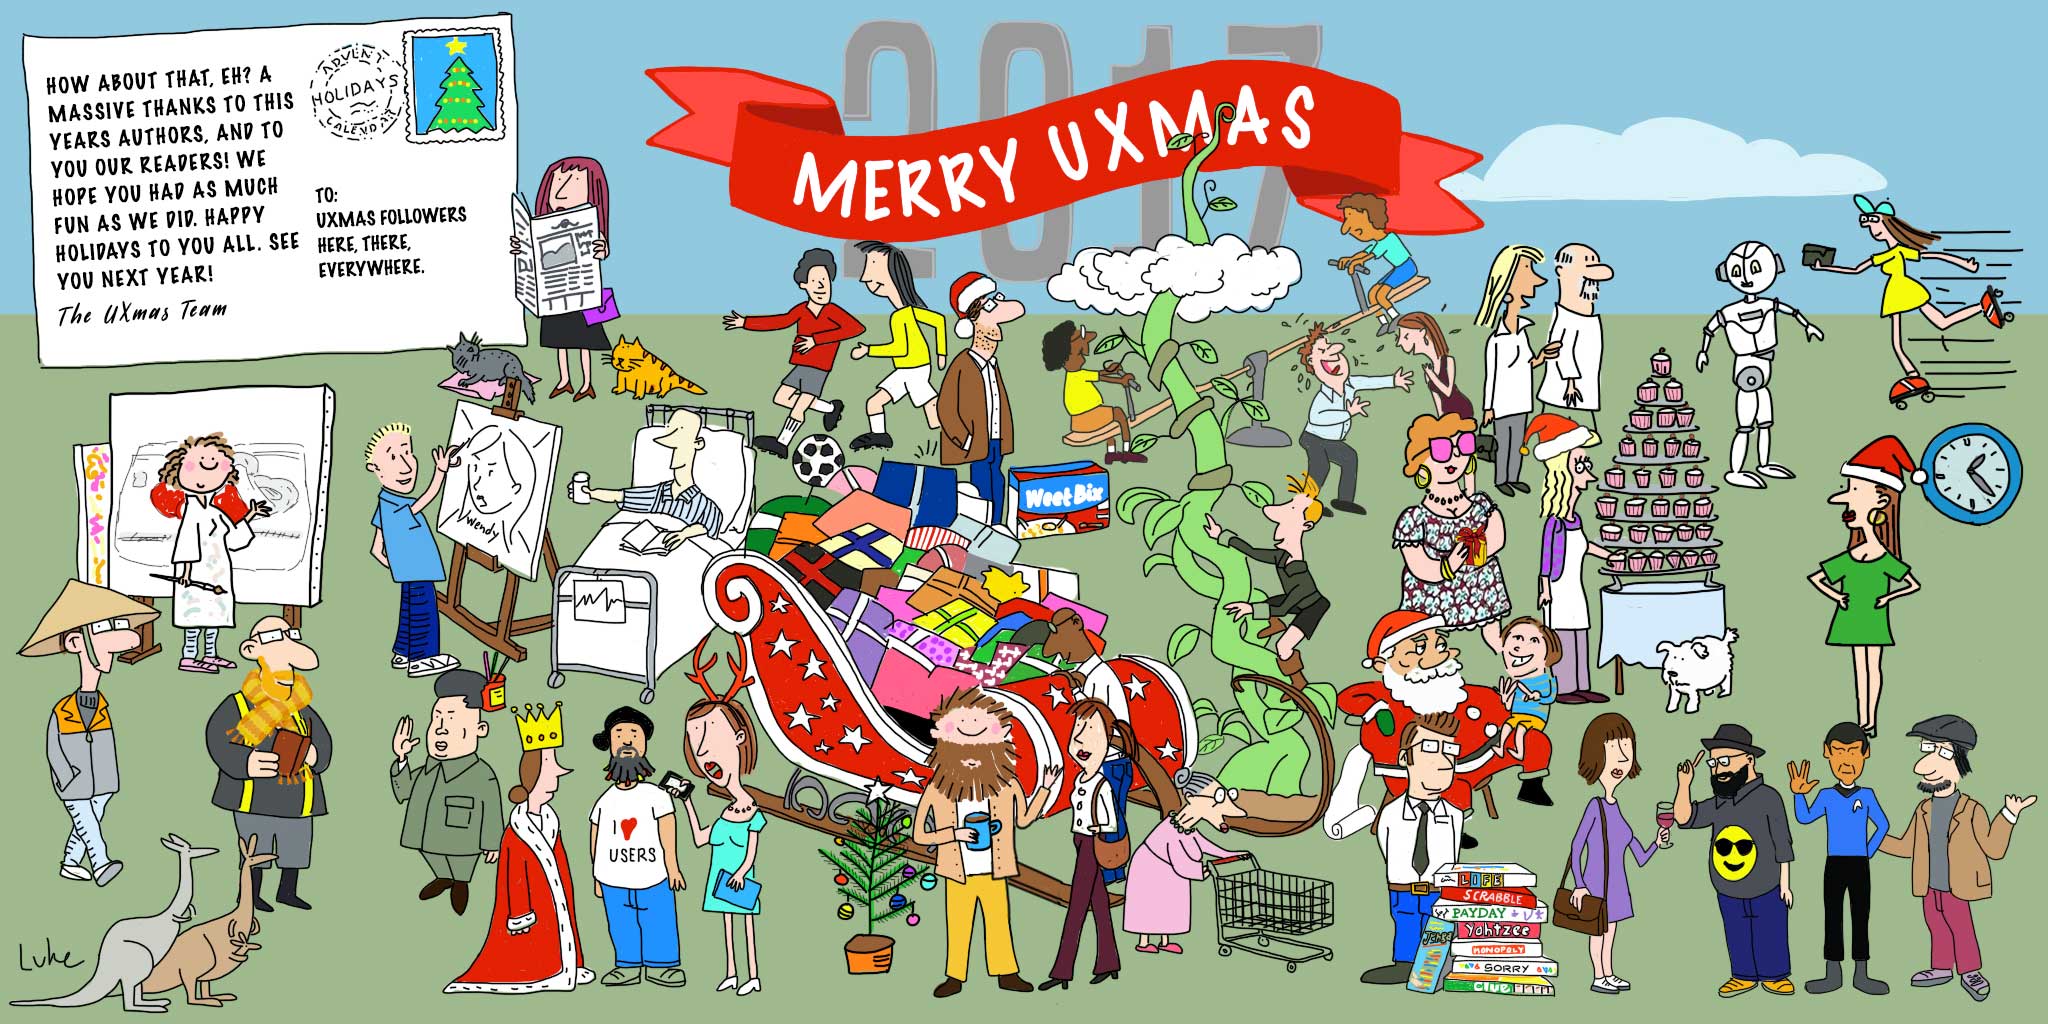 Merry UXmas 2017, authors in a large cartoon